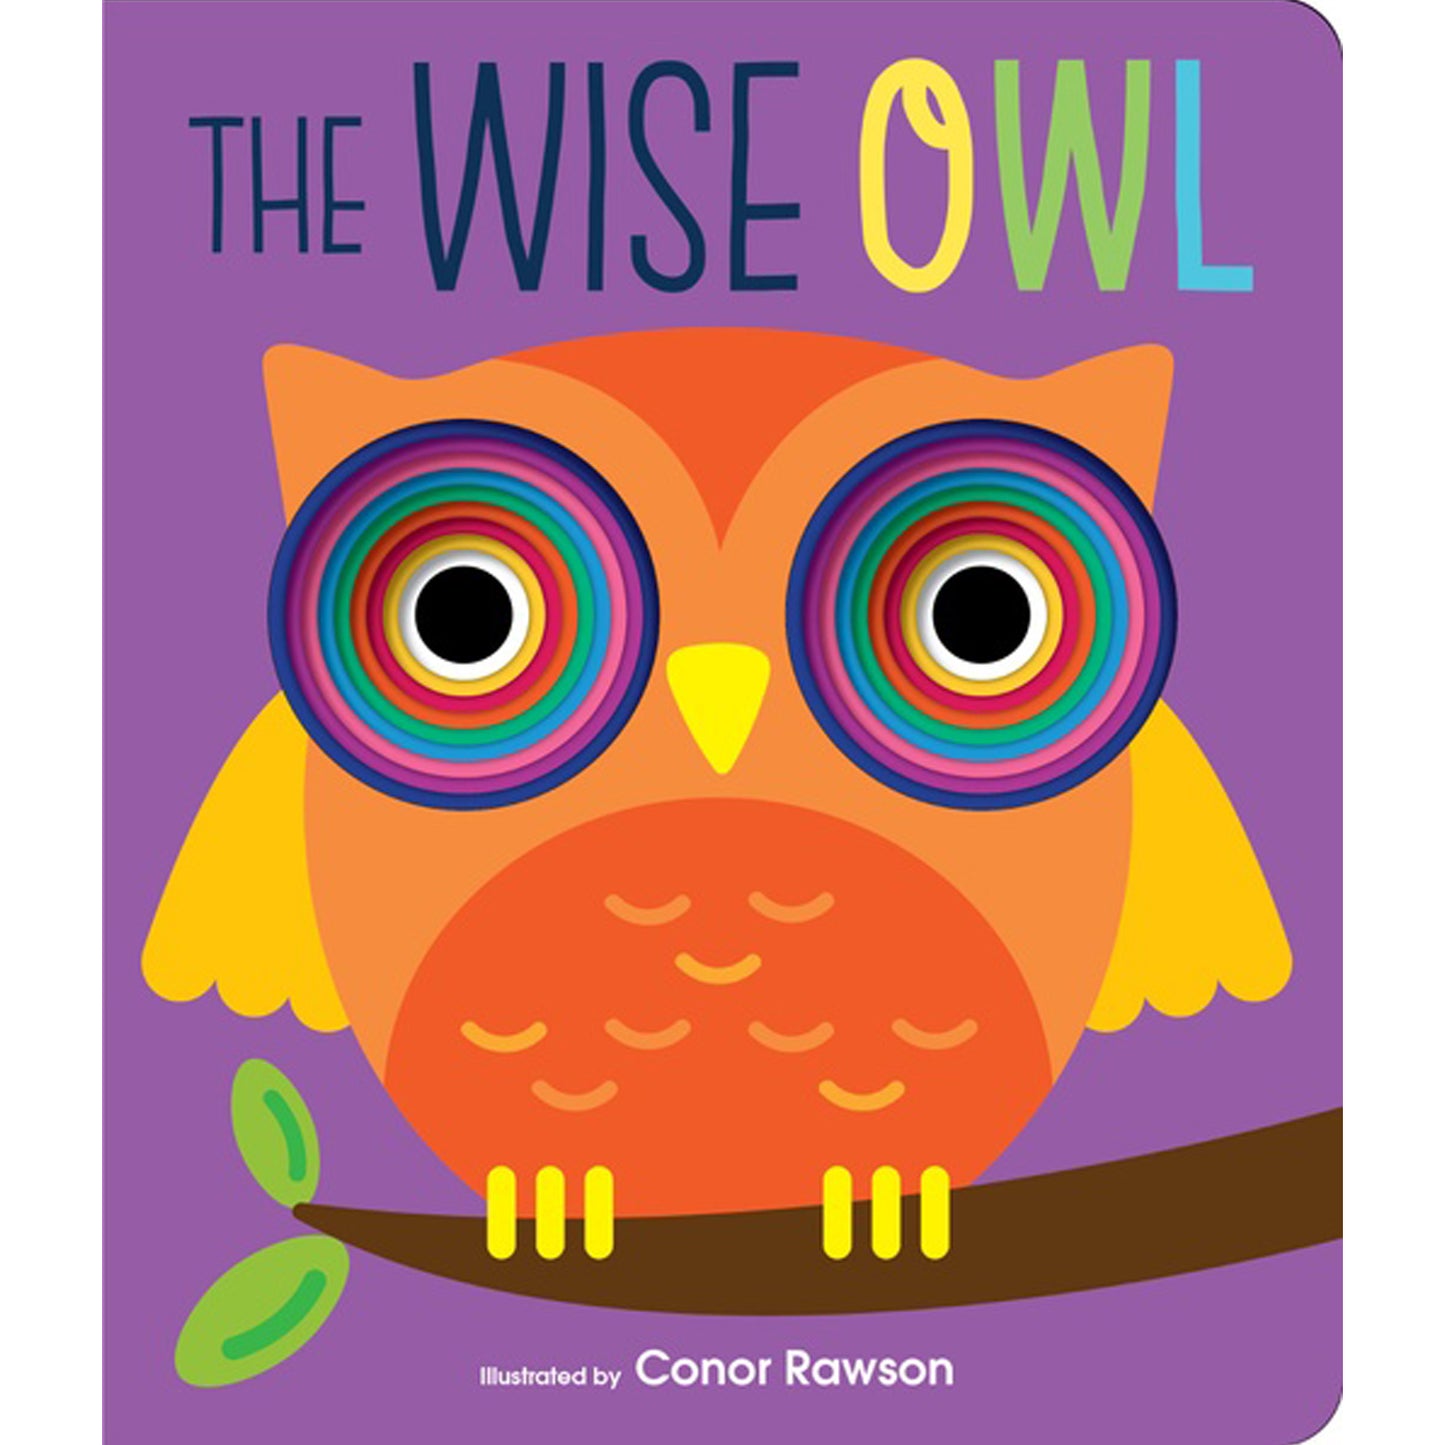 Graduating Board Book – The Wise Owl  | Children's books about birds | Early learning books | Board books | Die cut board books [Board book] Parragon